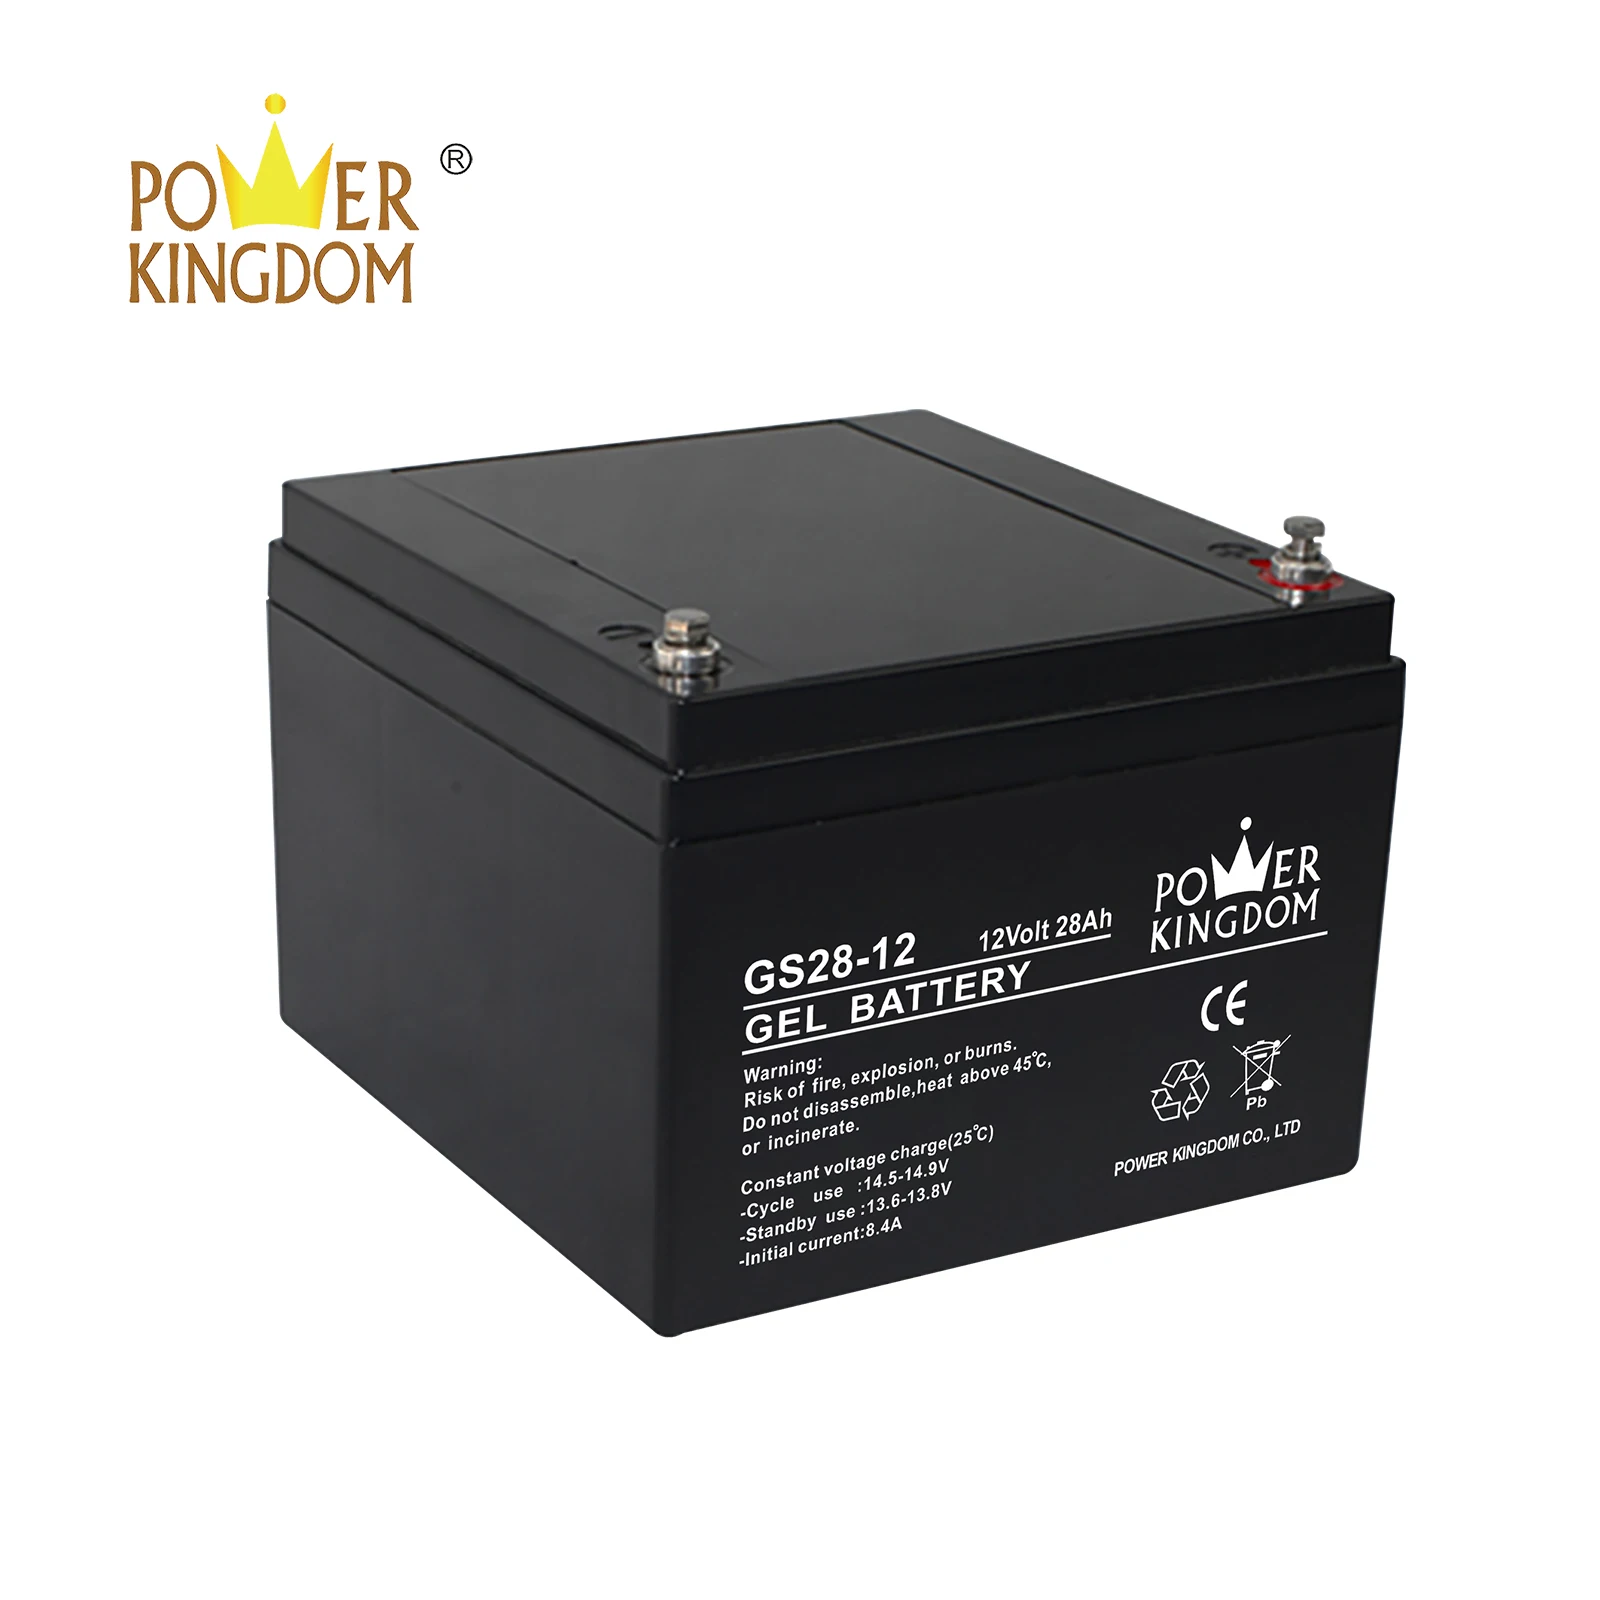 Power Kingdom long standby life rechargeable sealed lead acid battery design solor system